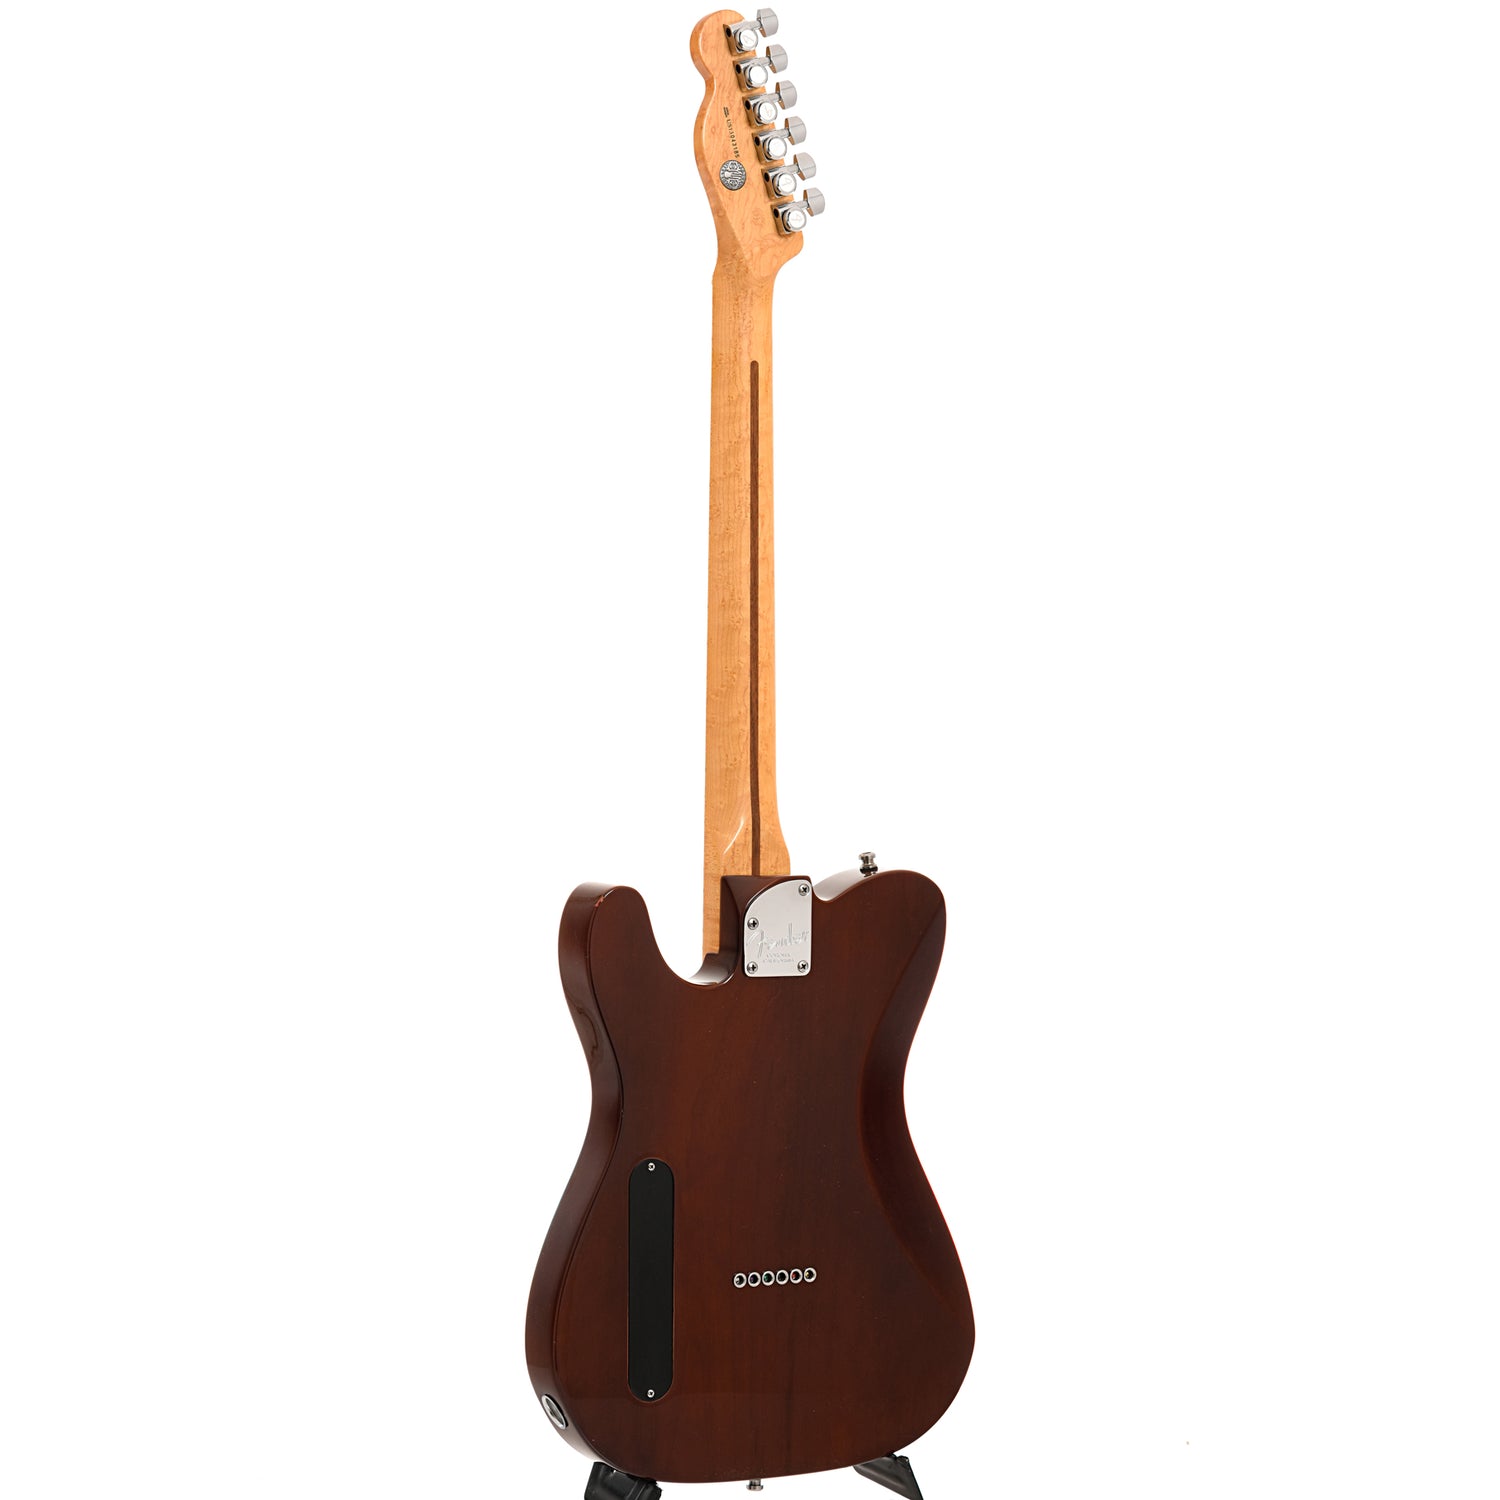 Full back and side of Fender Select Malaysian Blackwood Telecaster 